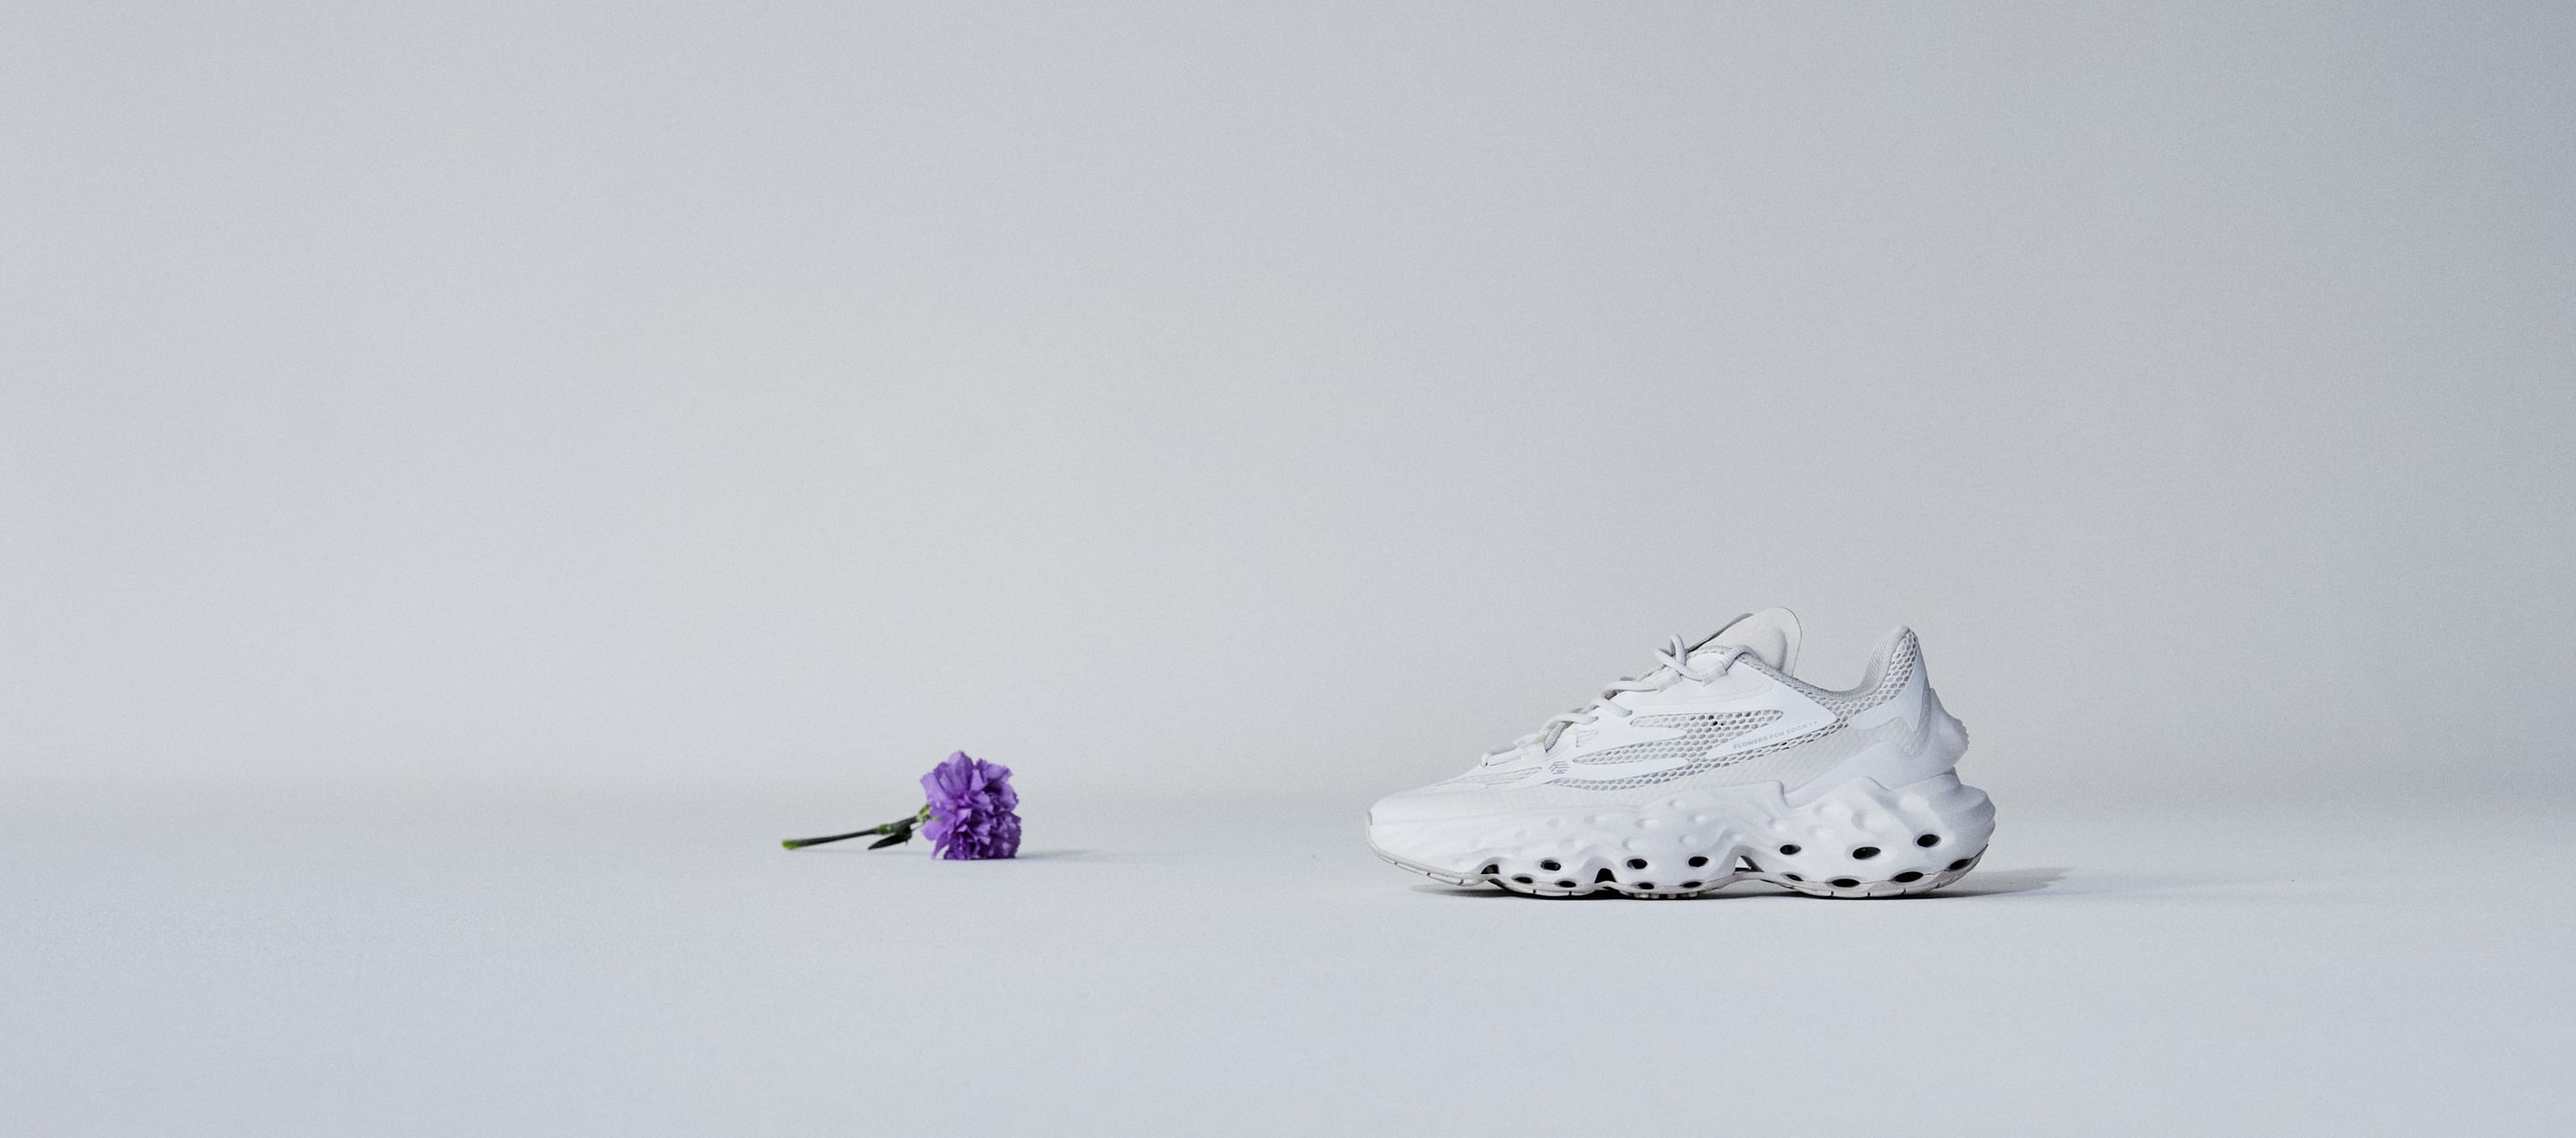 A picture of a purple flower on the left and a Seed.One shoe in the White Lily colorway from the lateral view on the right facing each other in a total position